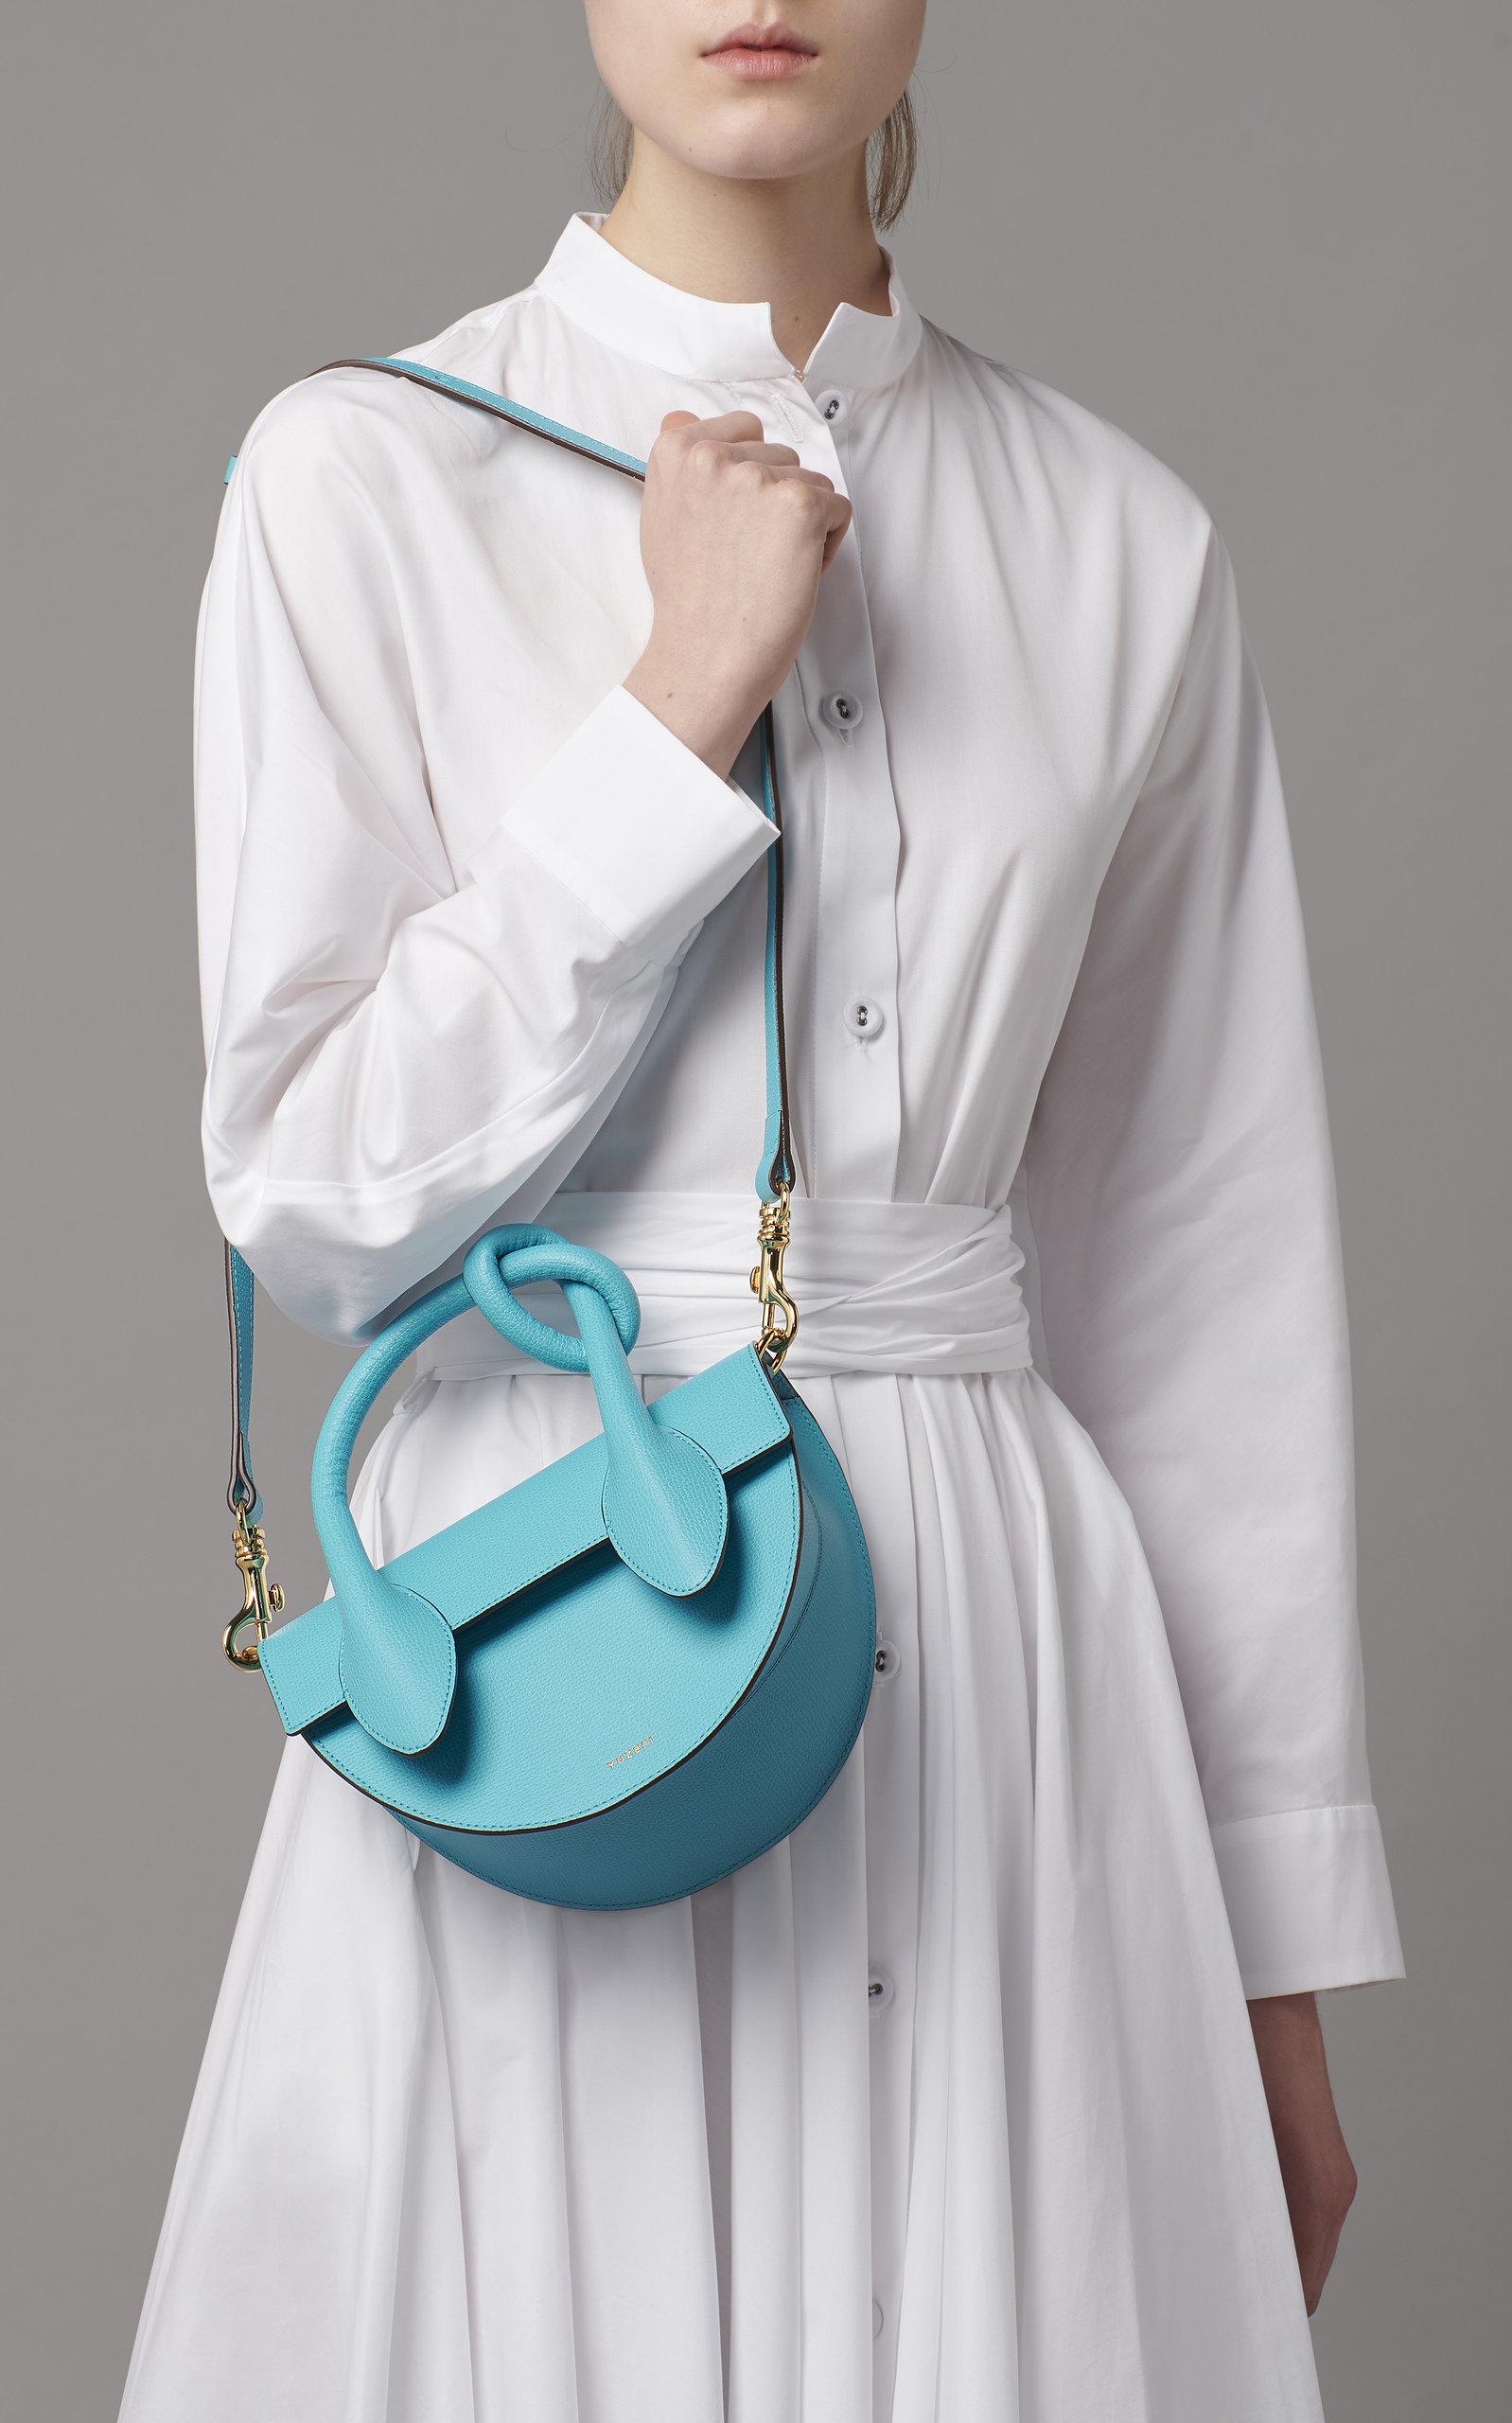 Yuzefi Dolores Leather Bag in Blue - Lyst